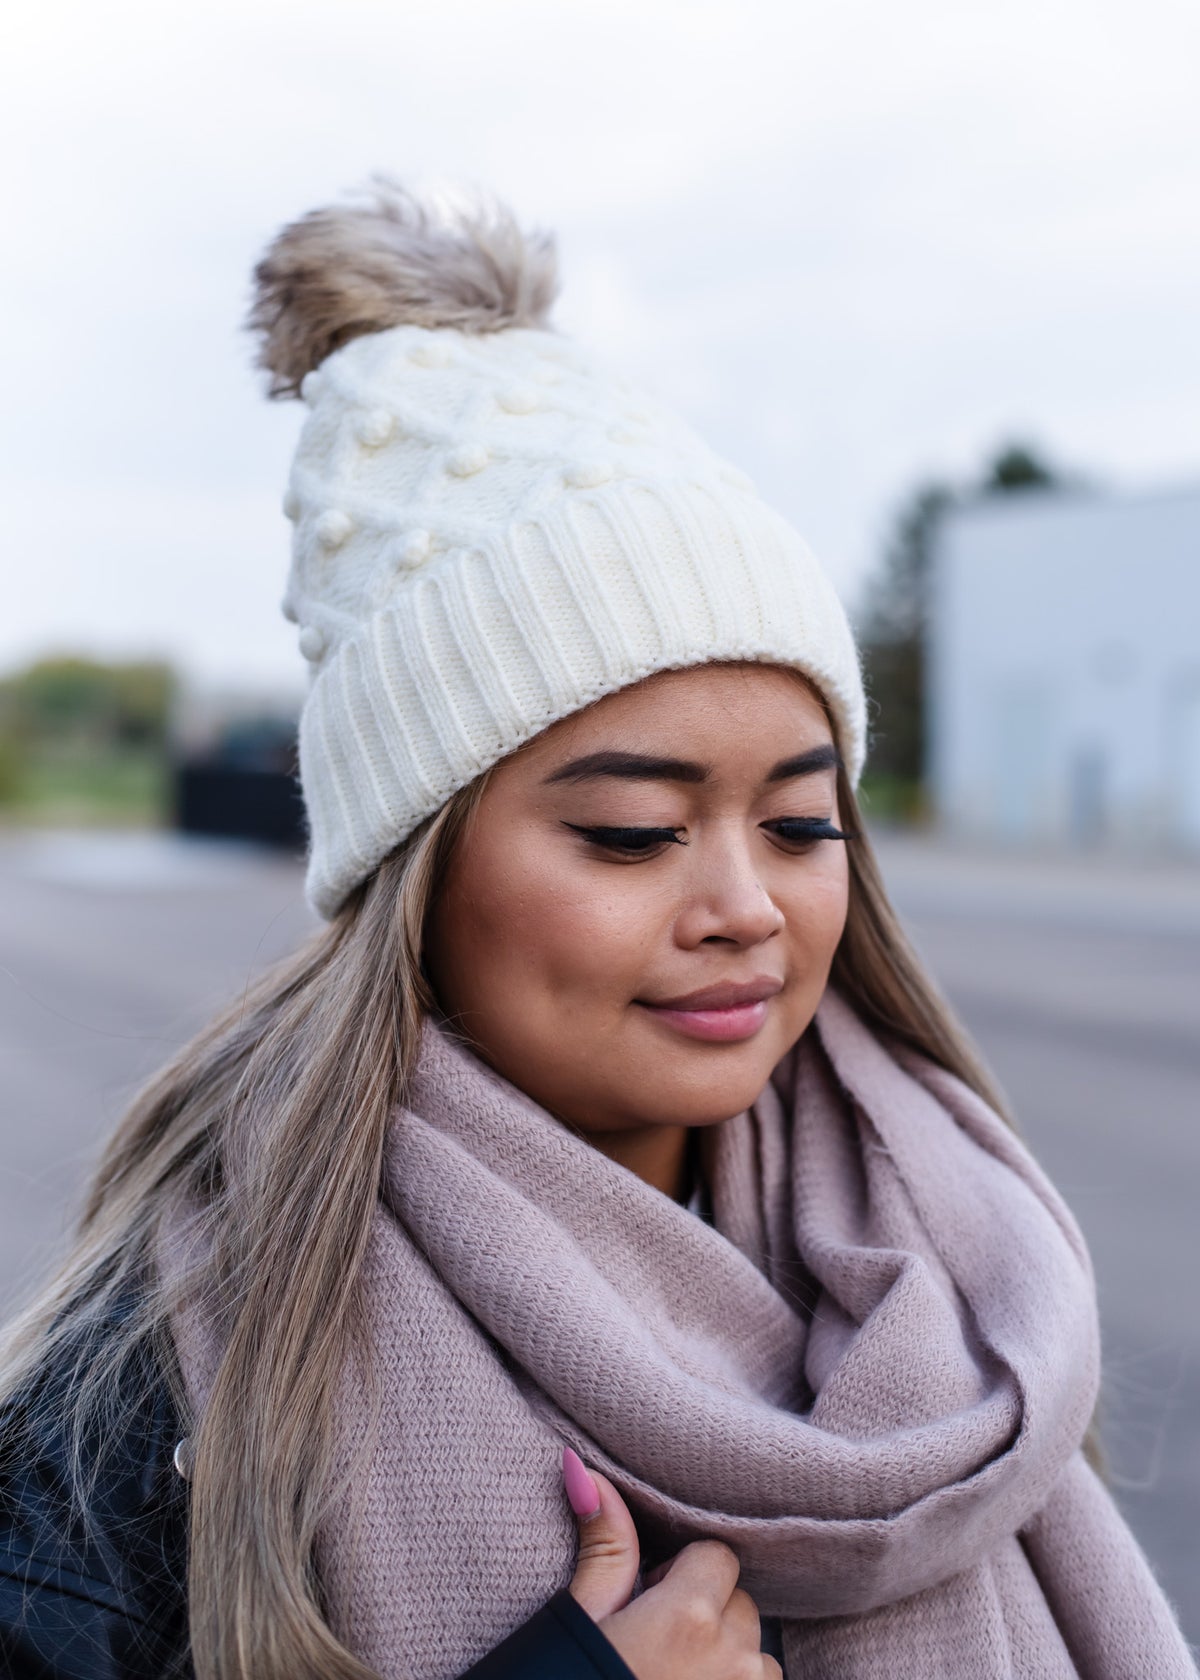 The Crafted Pom Beanie